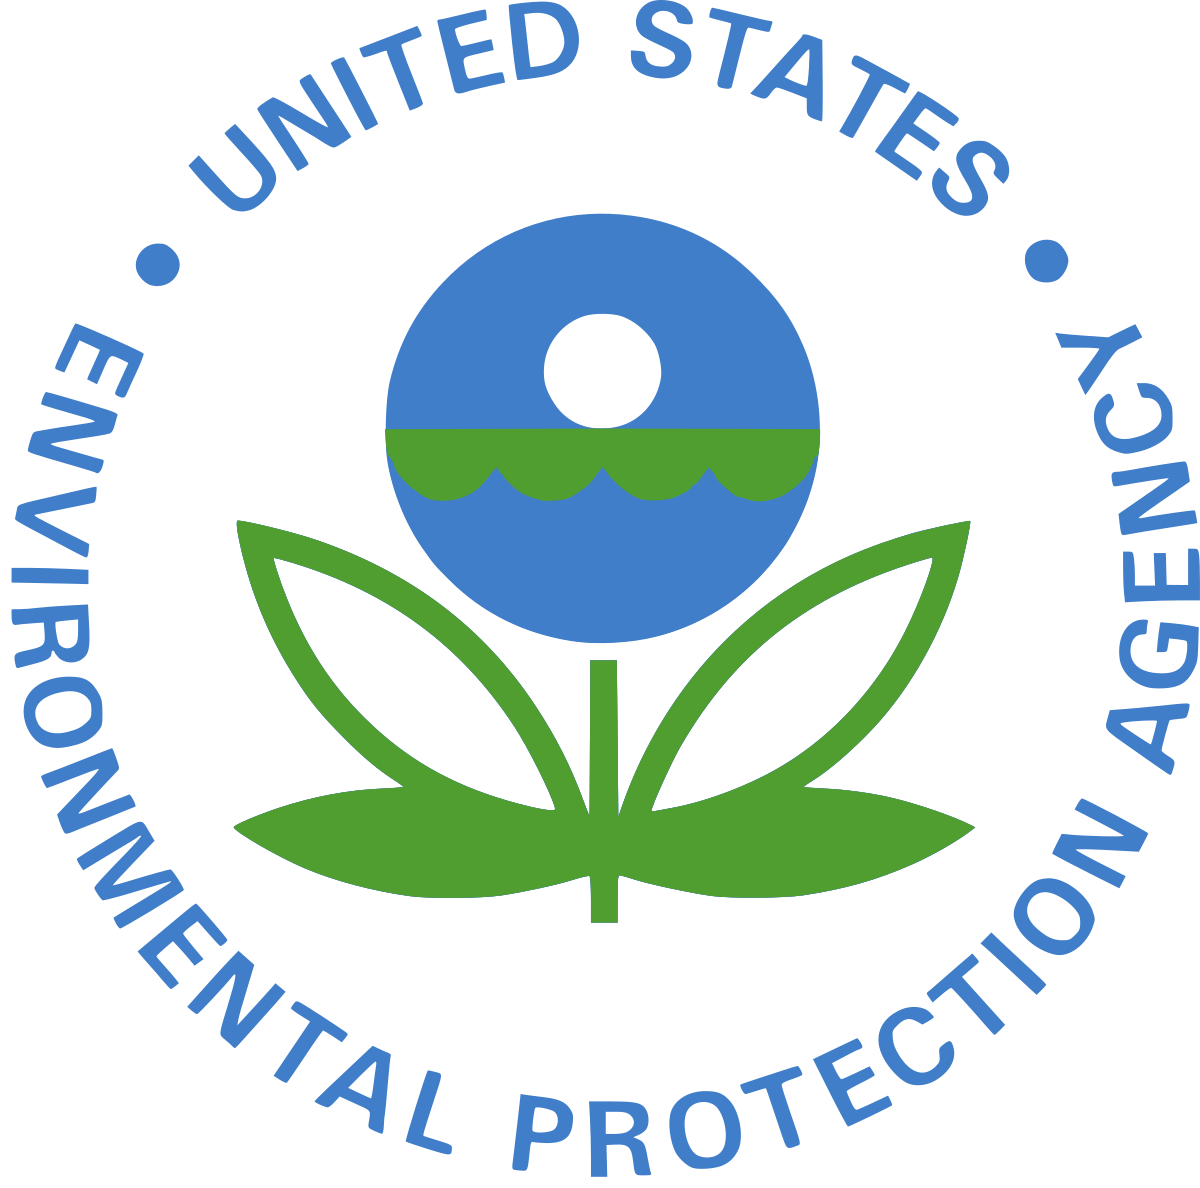 USEPA Announces New Drinking Water Health Advisories for PFAS Chemicals